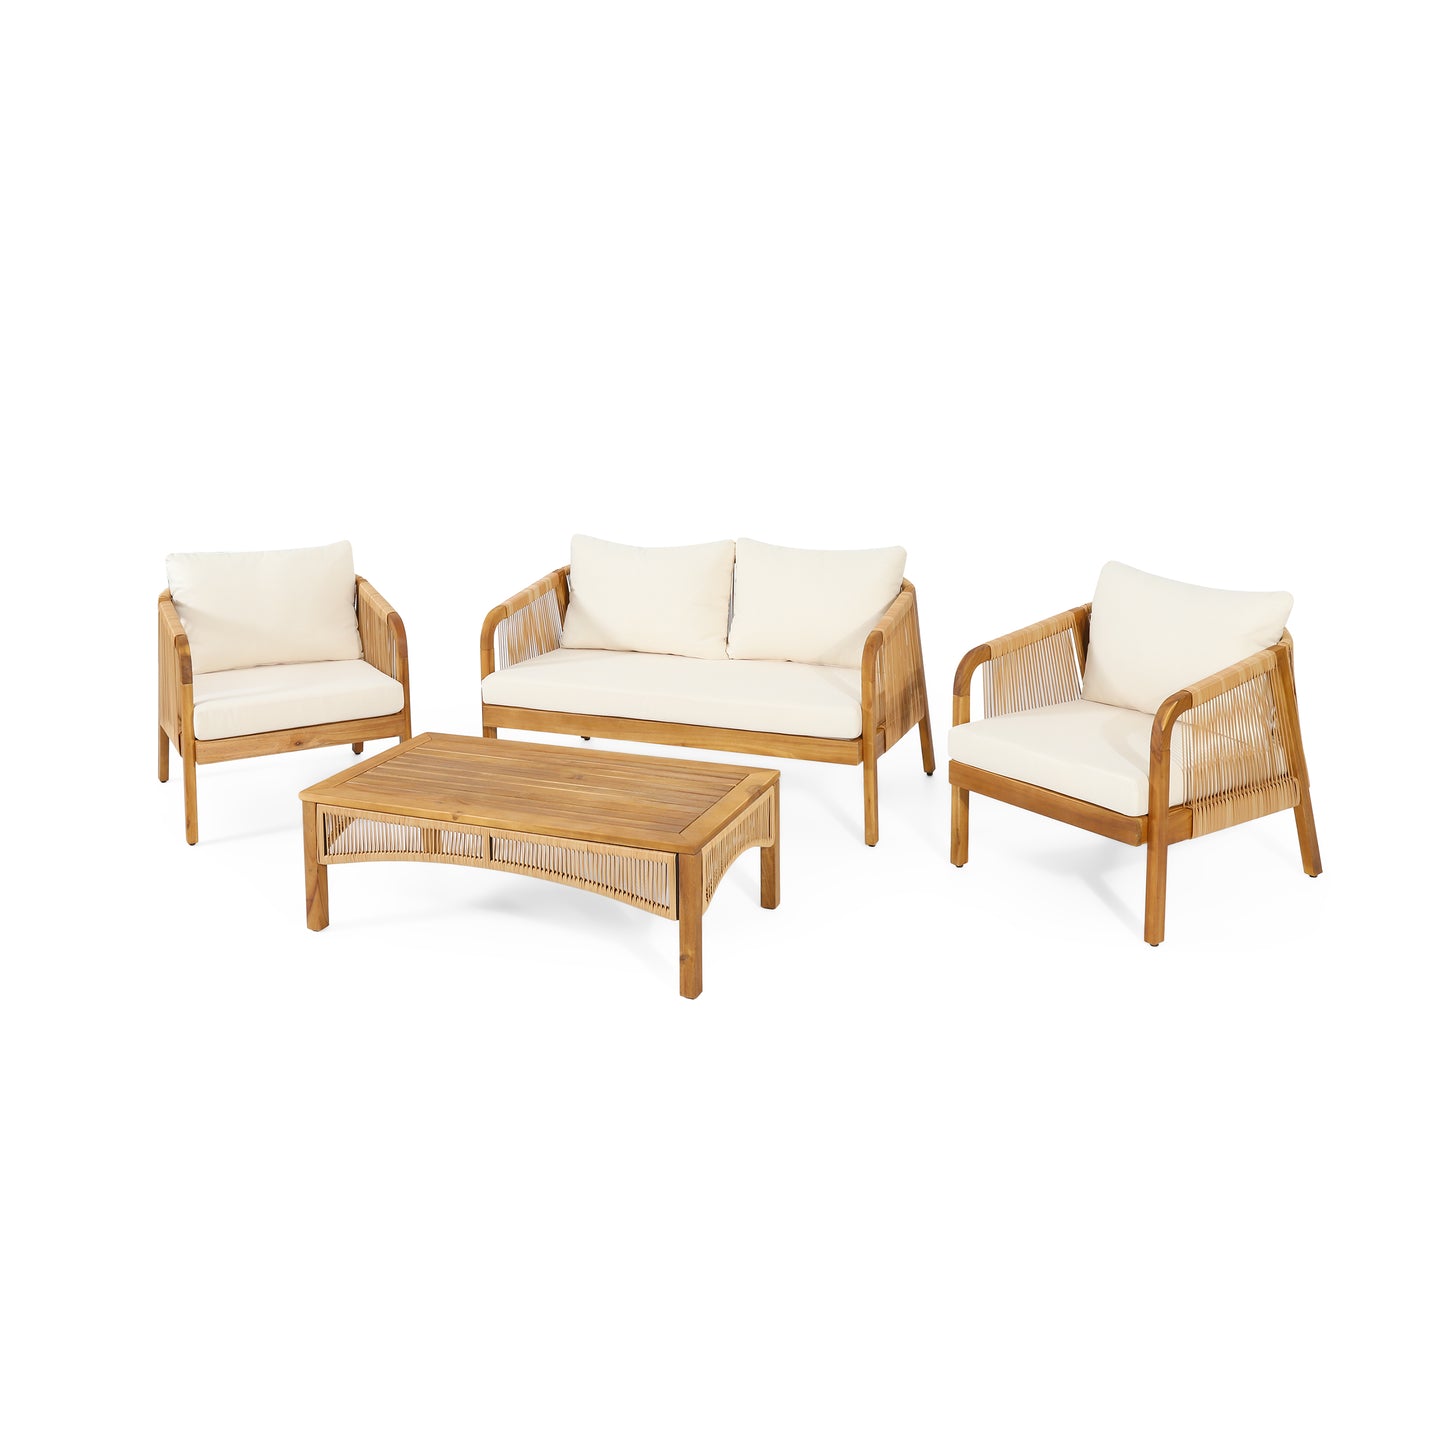 Allerton Outdoor Acacia Wood and Wicker 4 Seater Chat Set with Cushions, Teak, Light Brown, and Beige